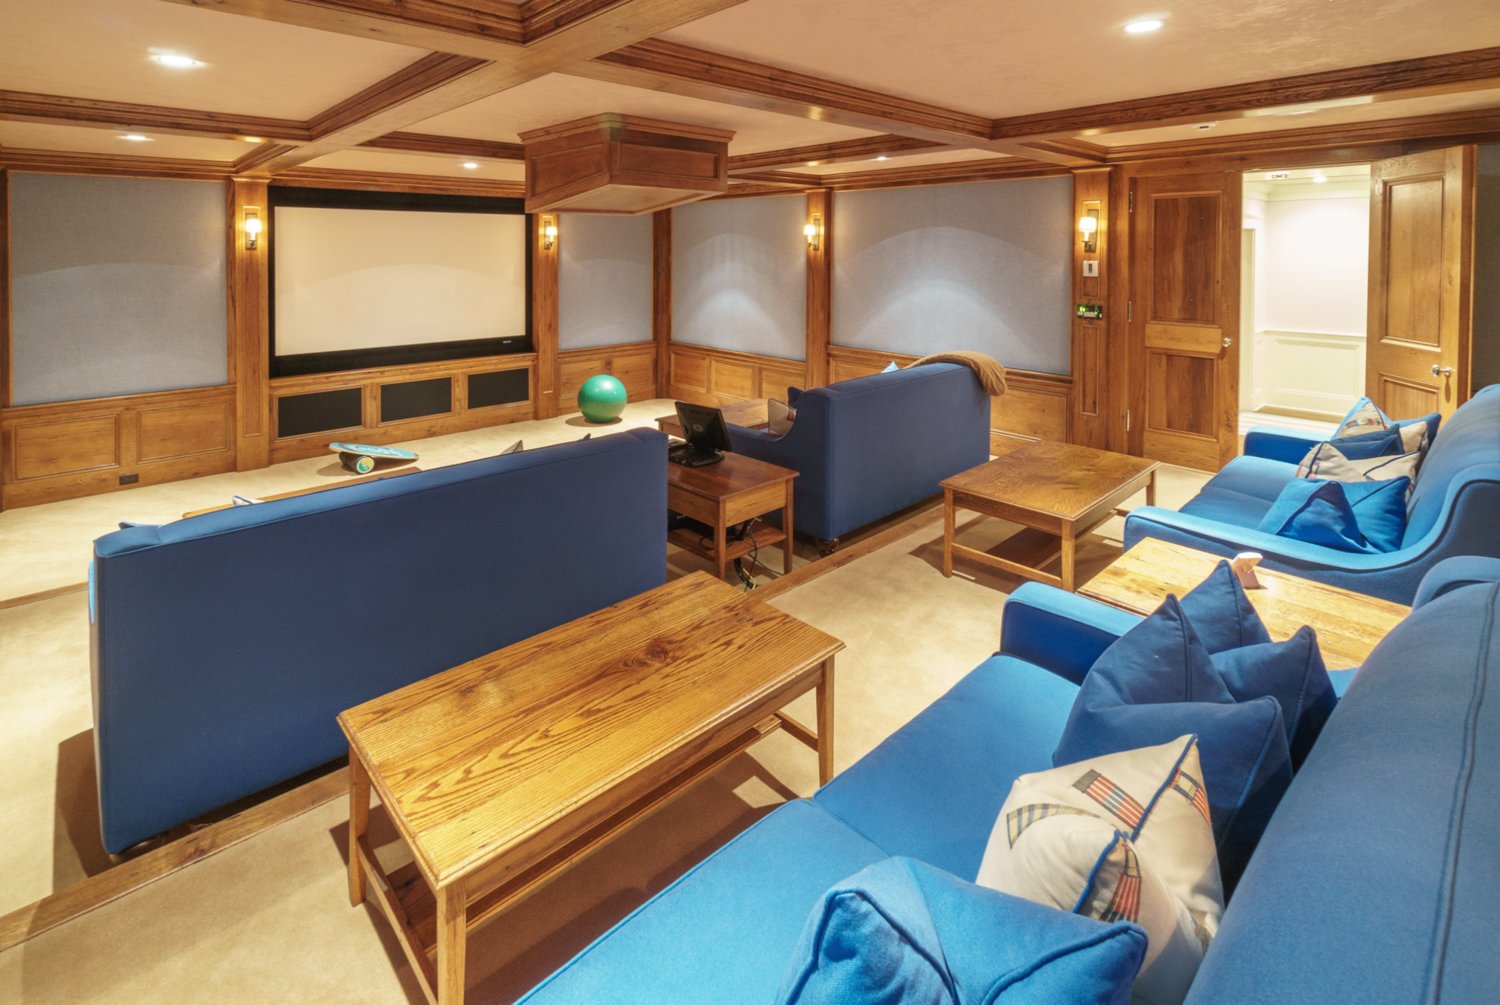 The three-tiered home theater has seating for 12.